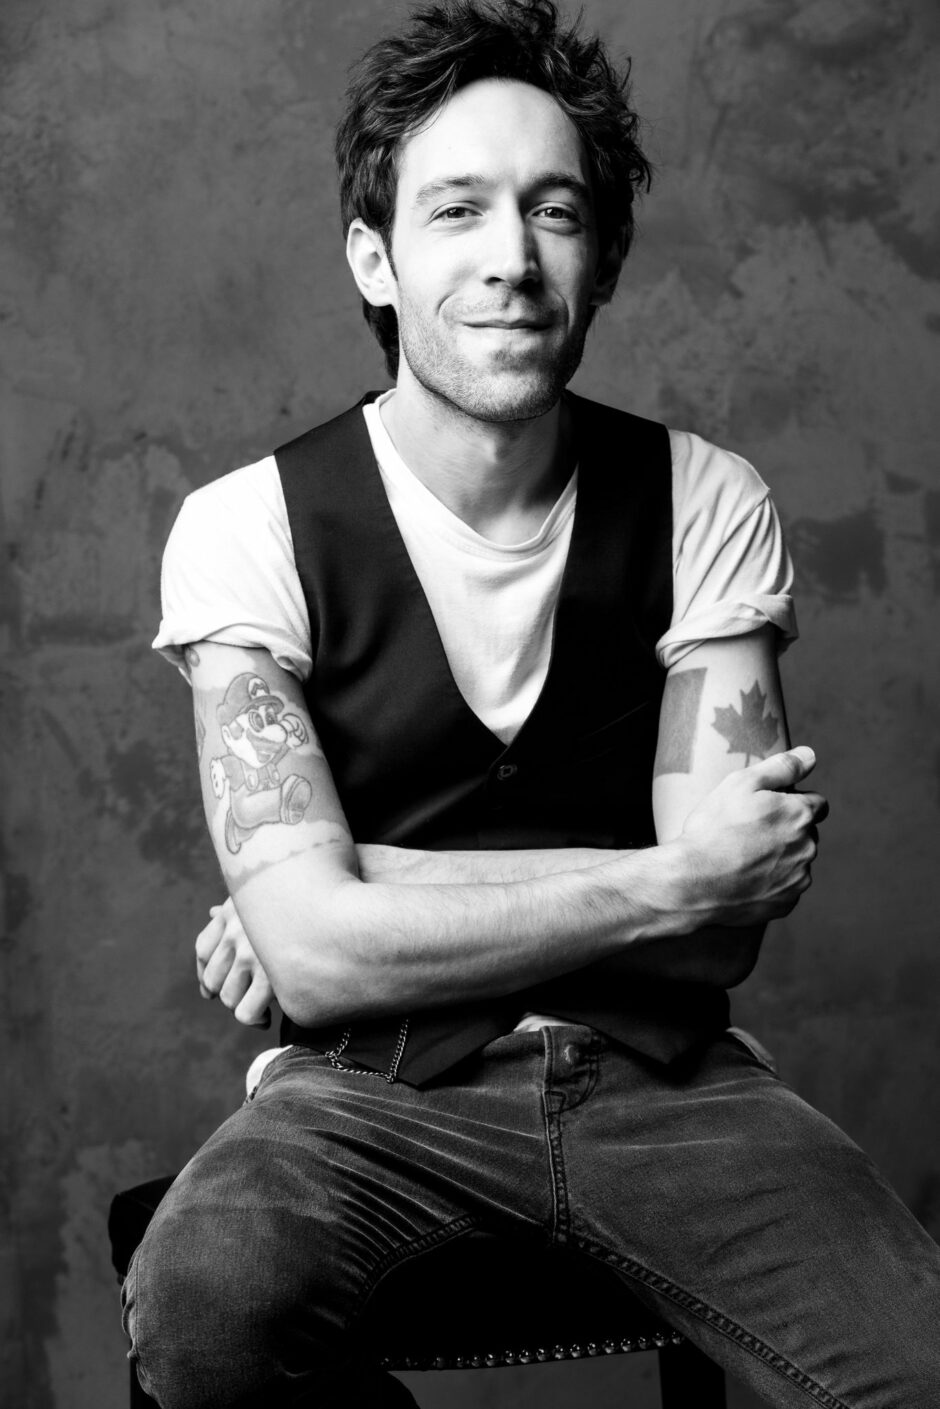 A black and white portrait of Creagen Dow sitting with a relaxed, confident expression. He is wearing a sleeveless vest over a white t-shirt, revealing tattoos on both his arms—a cartoon character on his left and a maple leaf on his right. The background is a plain, textured wall.